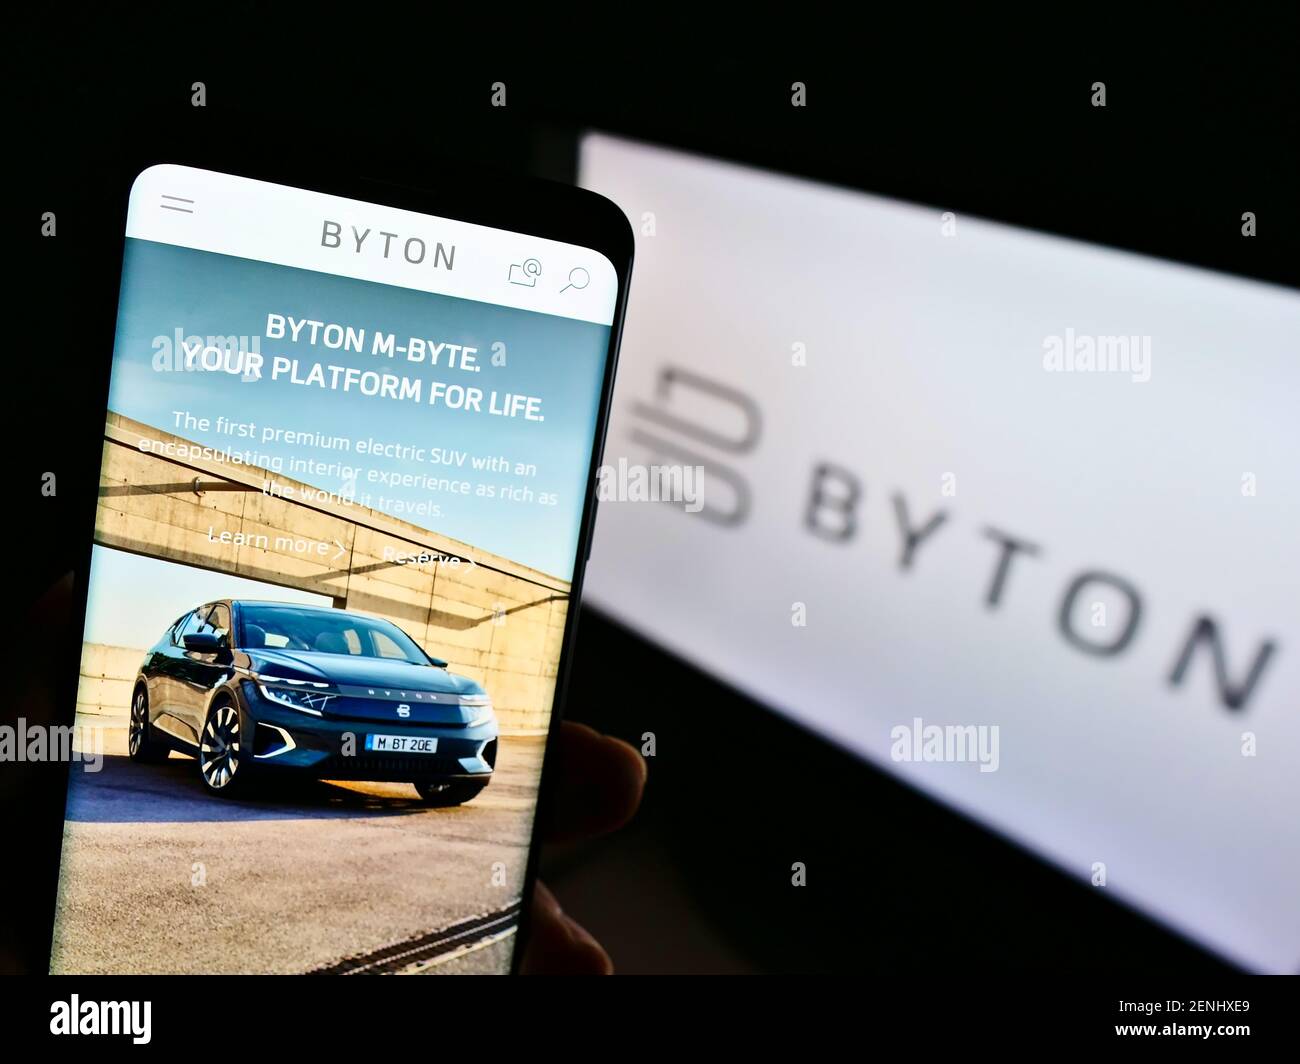 Person holding mobile phone with logo of Chinese automotive brand Byton on screen in front of business web page. Focus on center of phone display. Stock Photo